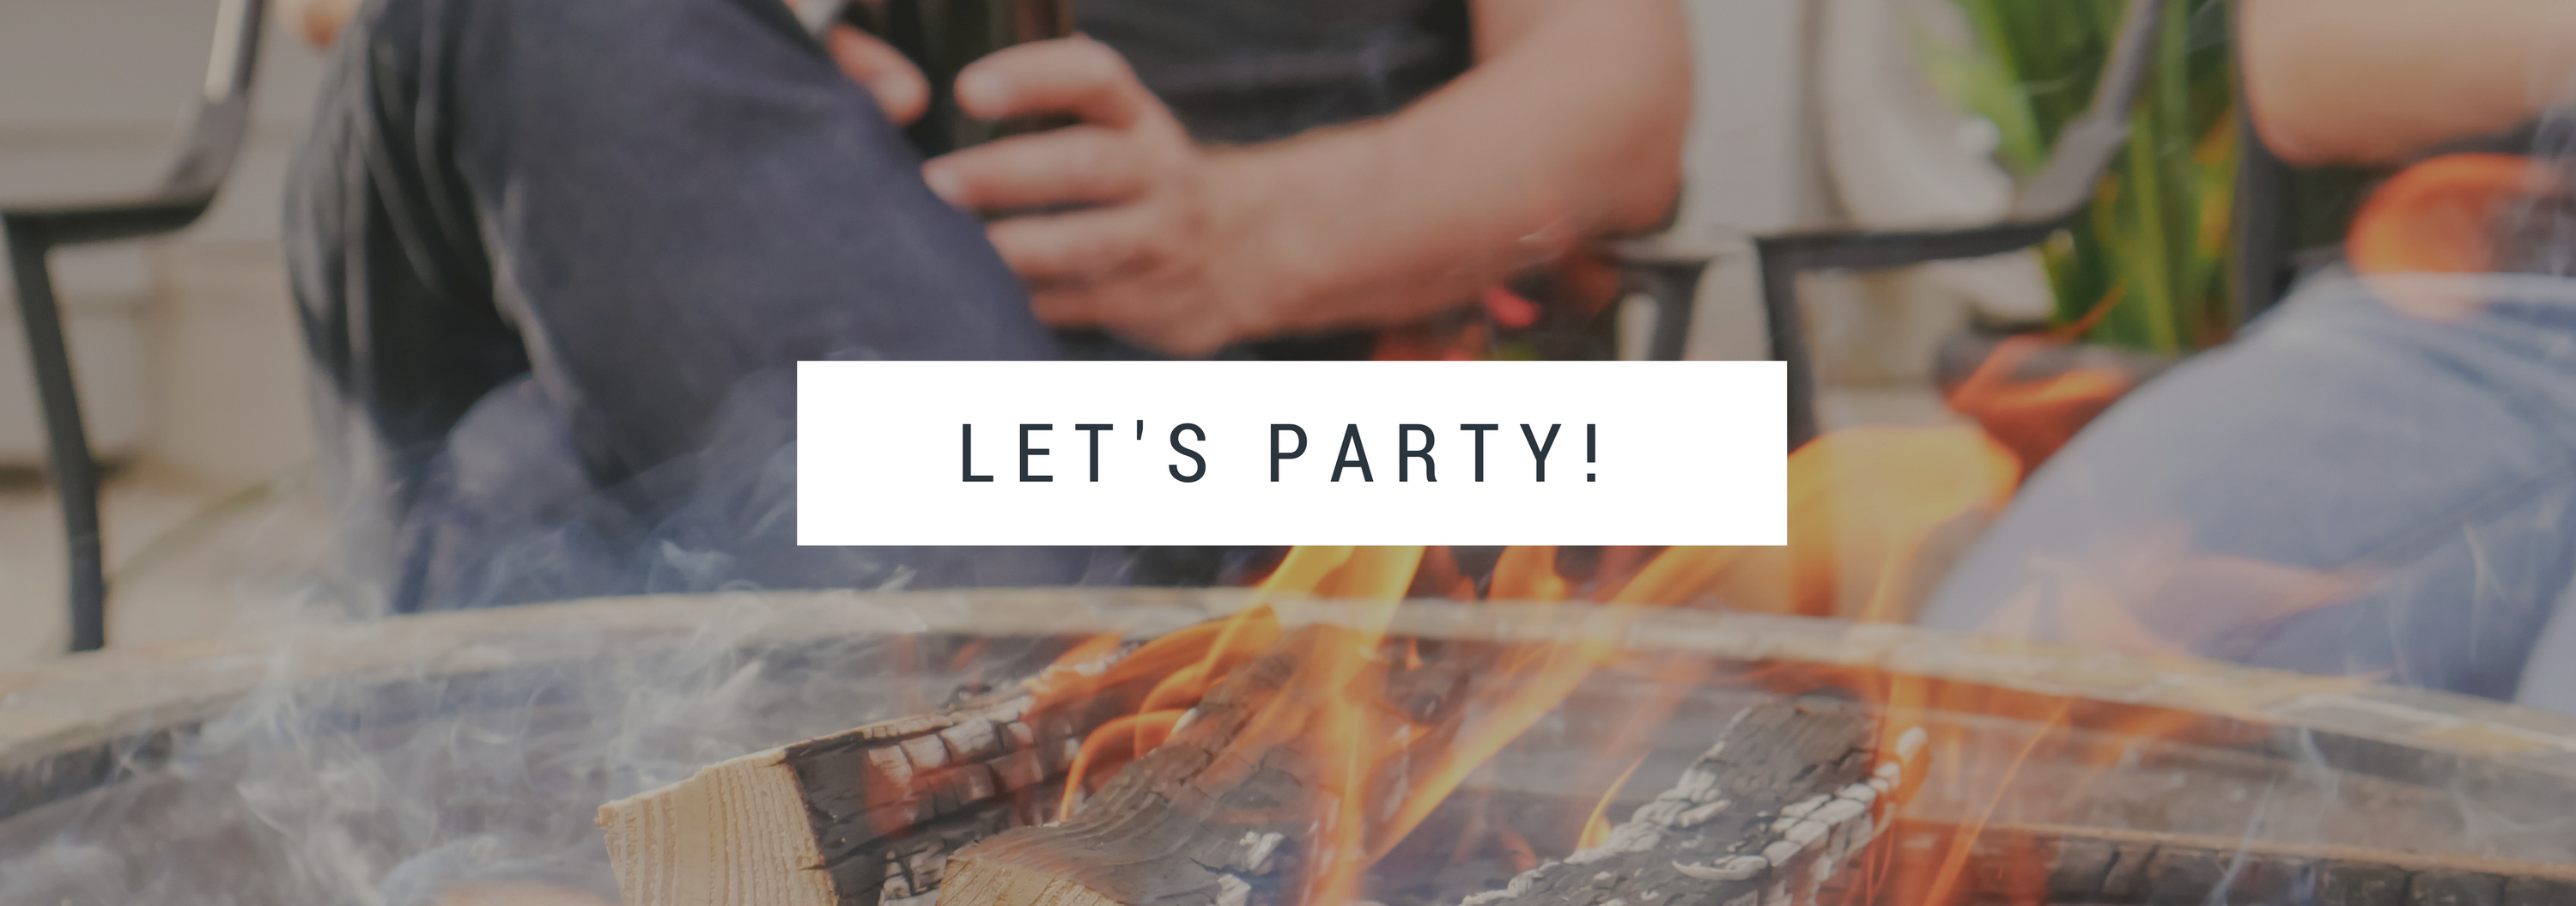 2 people aroudn a firepit church ministry idea Neighborhood Party Header Lets Party.png